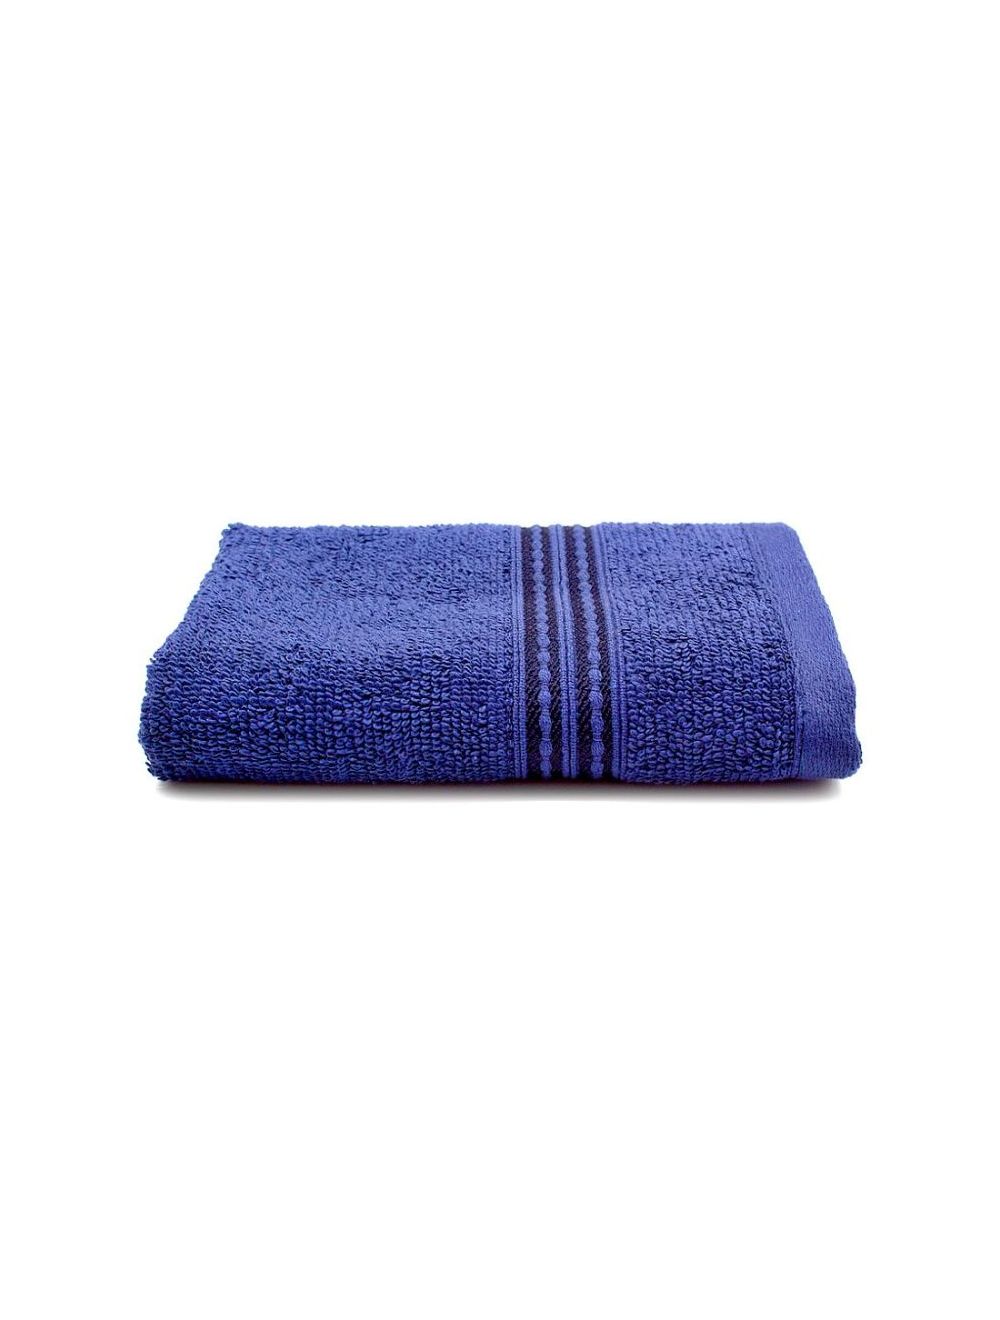 Rahalife 100% Cotton Face Towel, Classic Collection, Blue -14RLFT031